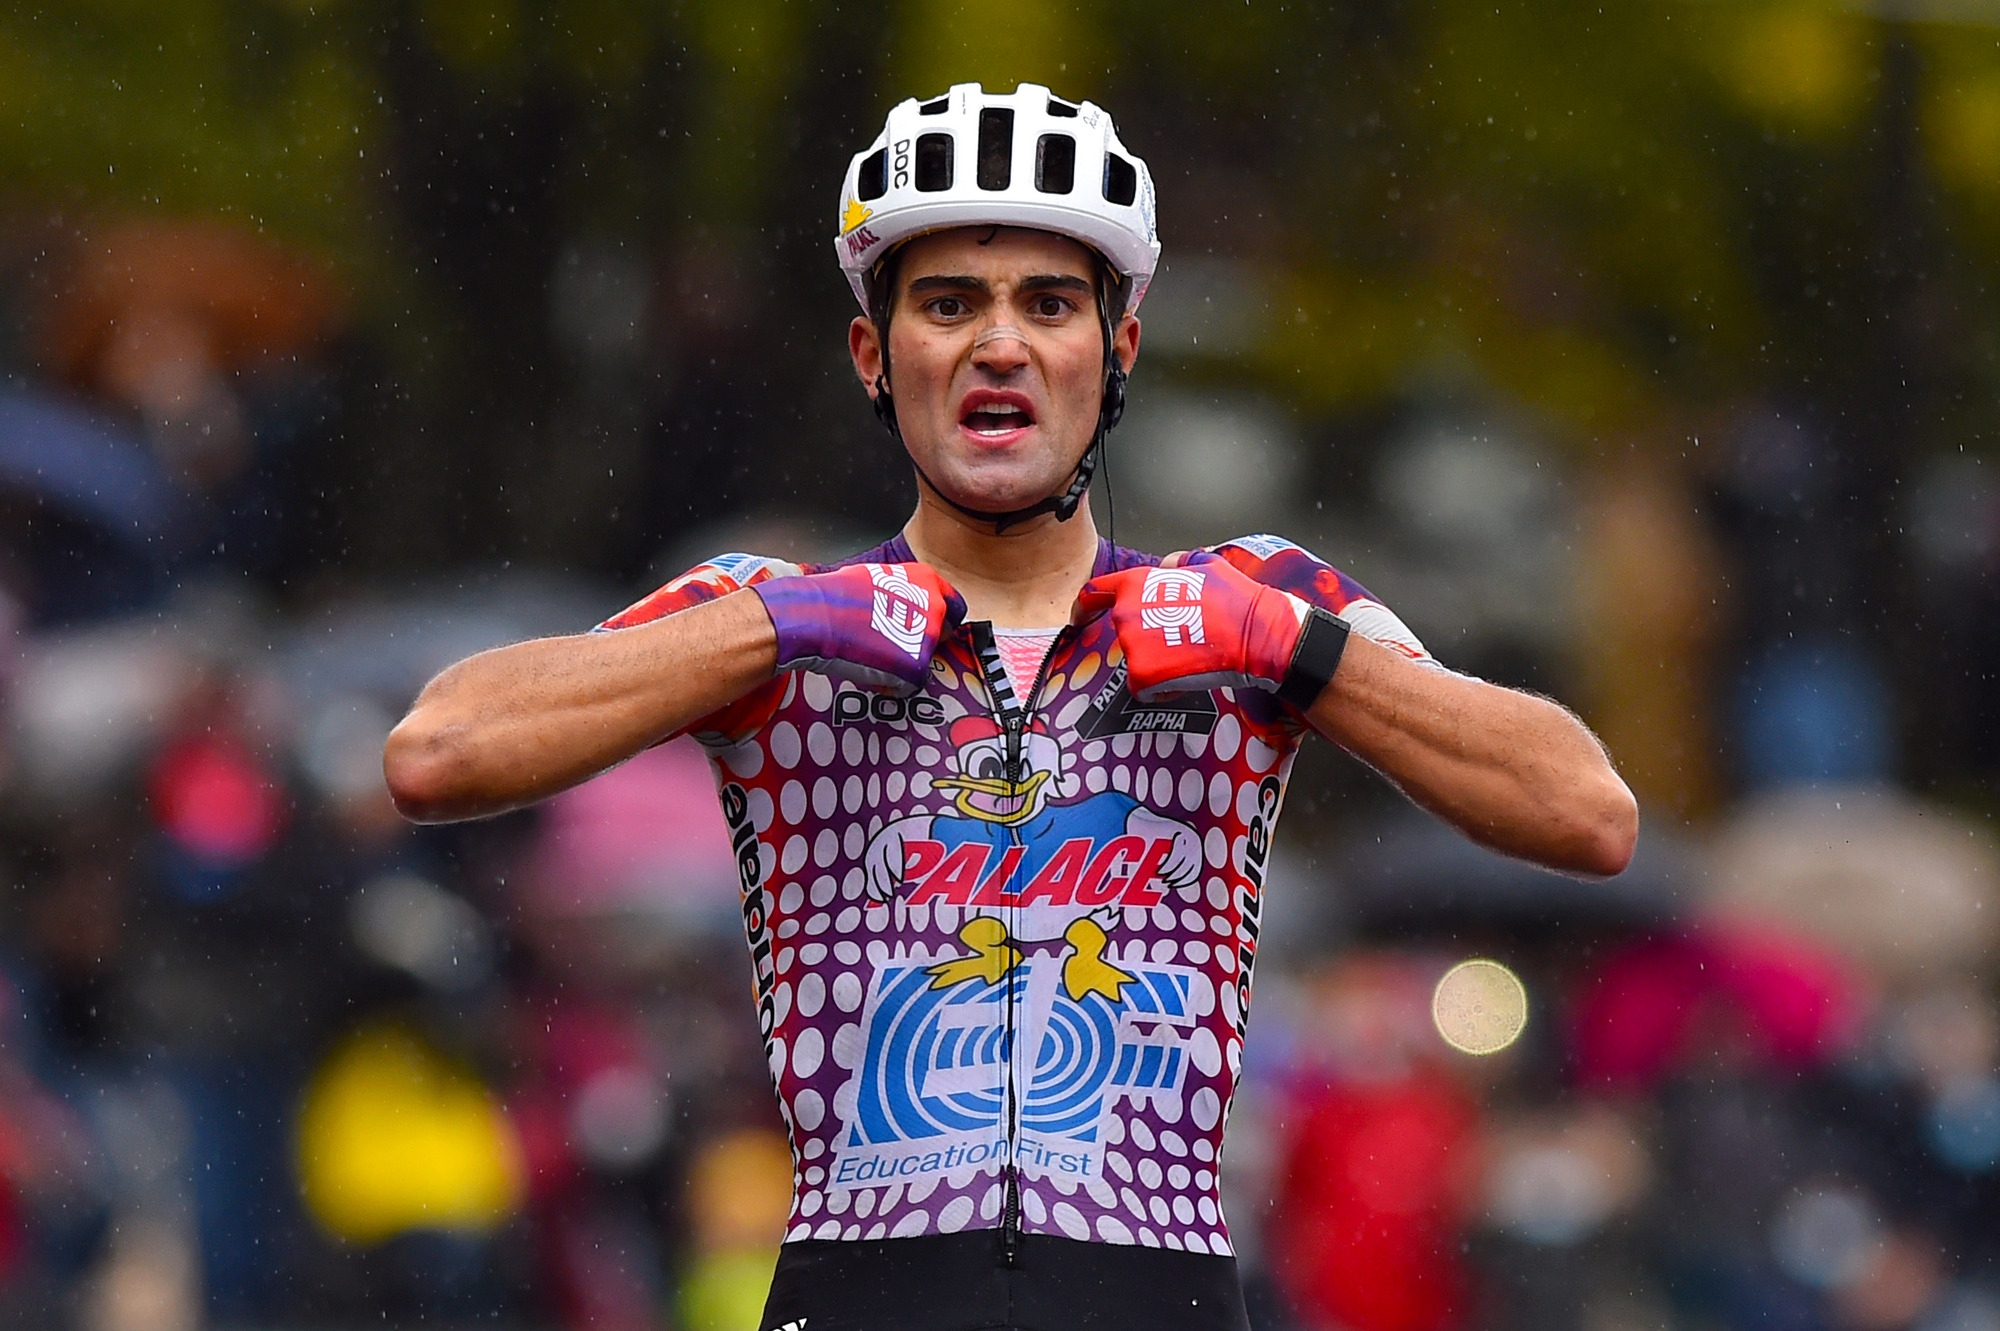 EF Pro Cycling's Ruben Guerreiro celebrates his victory on stage 9 of the 2020 Giro d'Italia